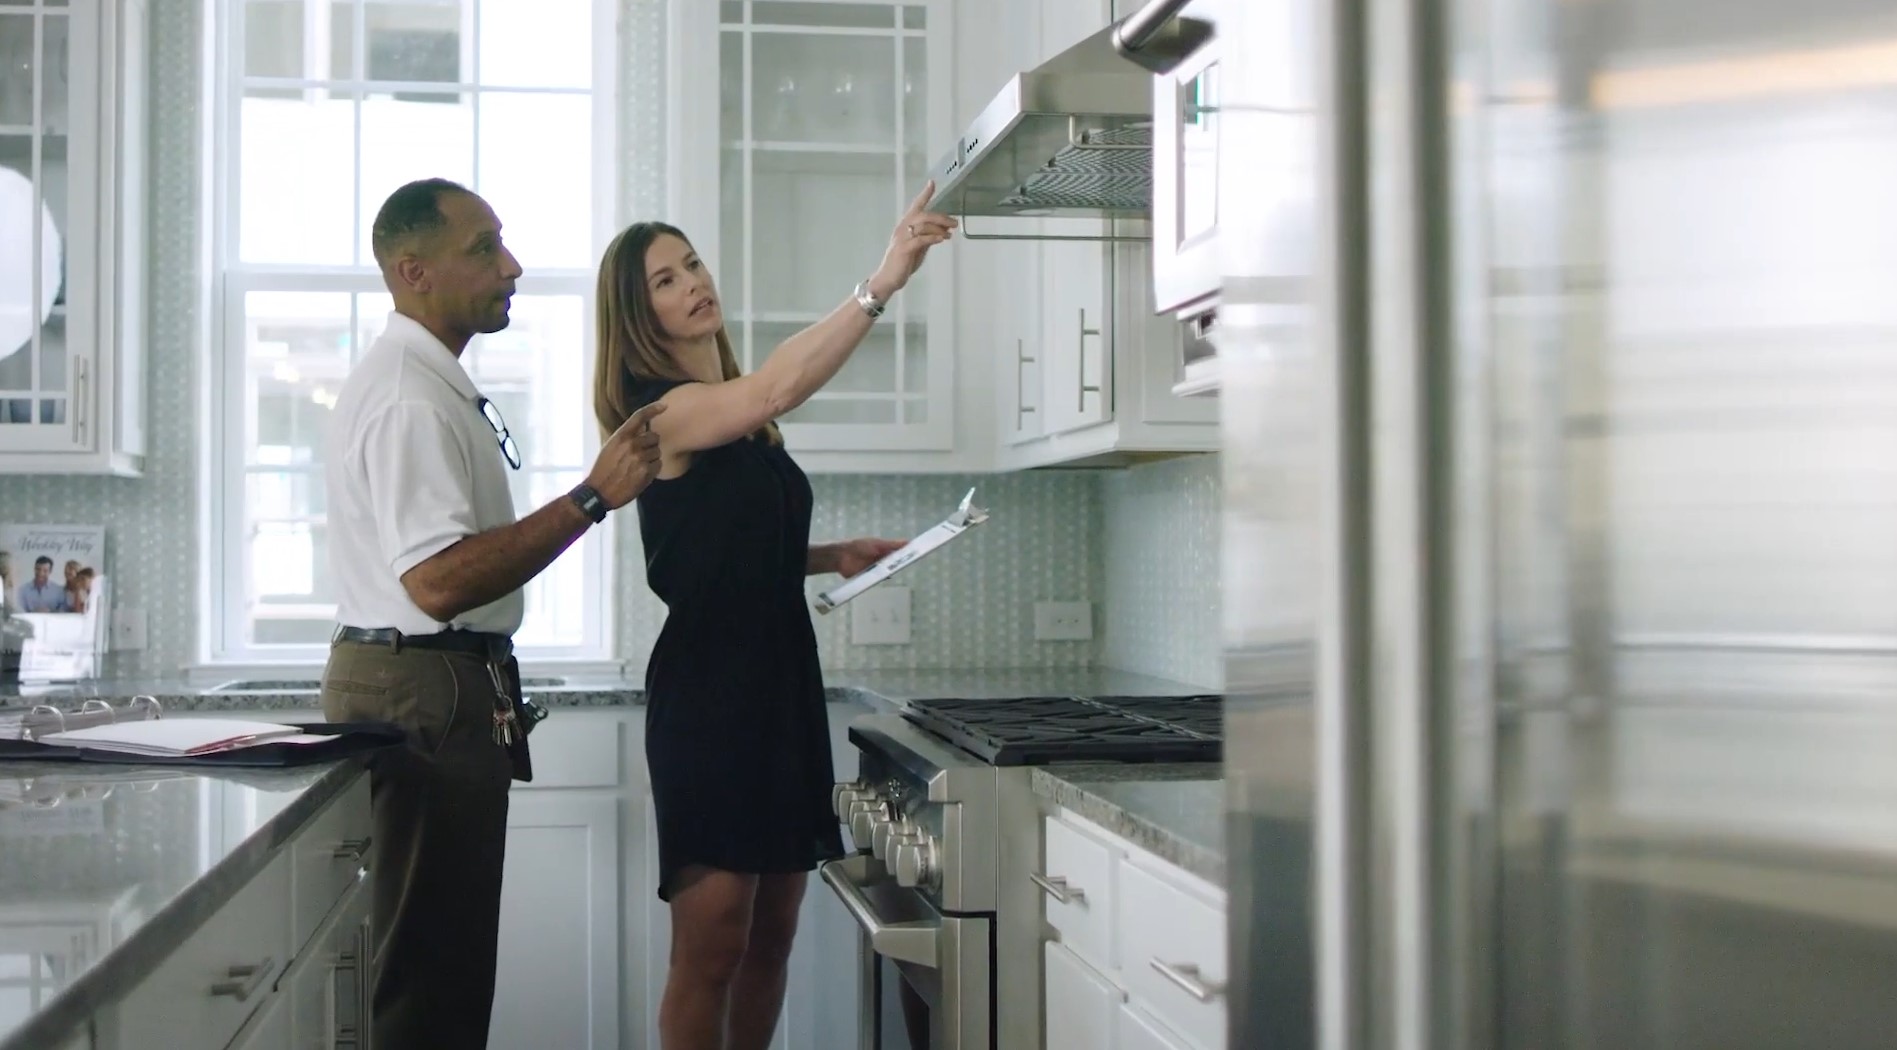 A David Weekley Homes Sales Consultant shows a customer the details of an oven hood in a kitchen